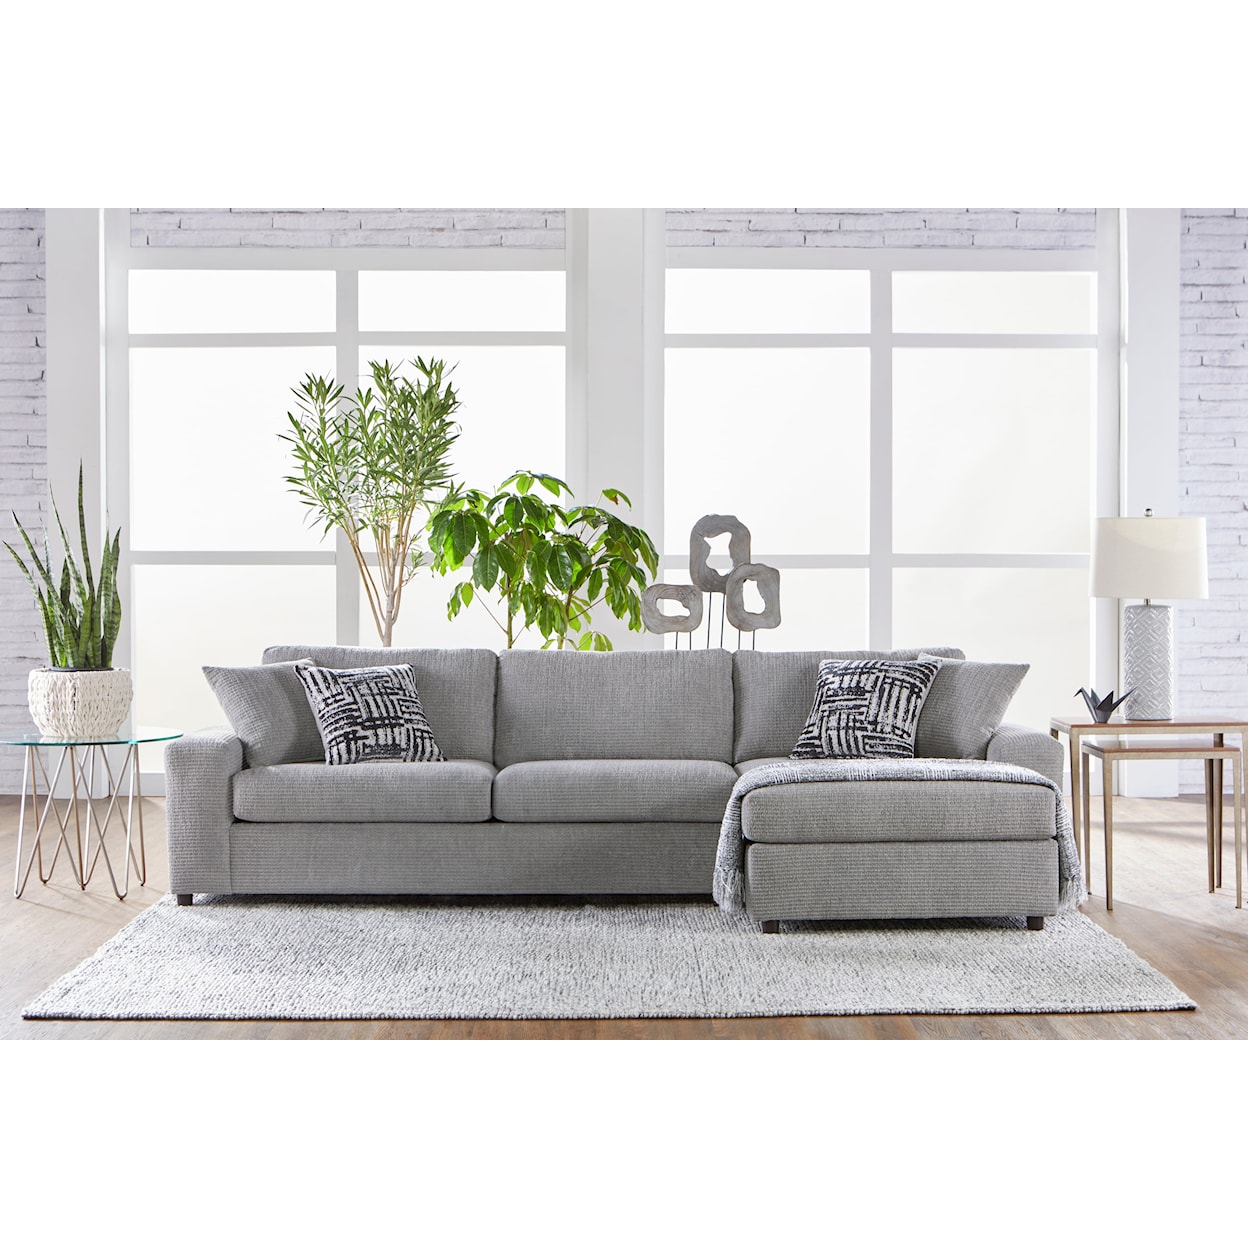 New Classic Tristan Sectional Sofa